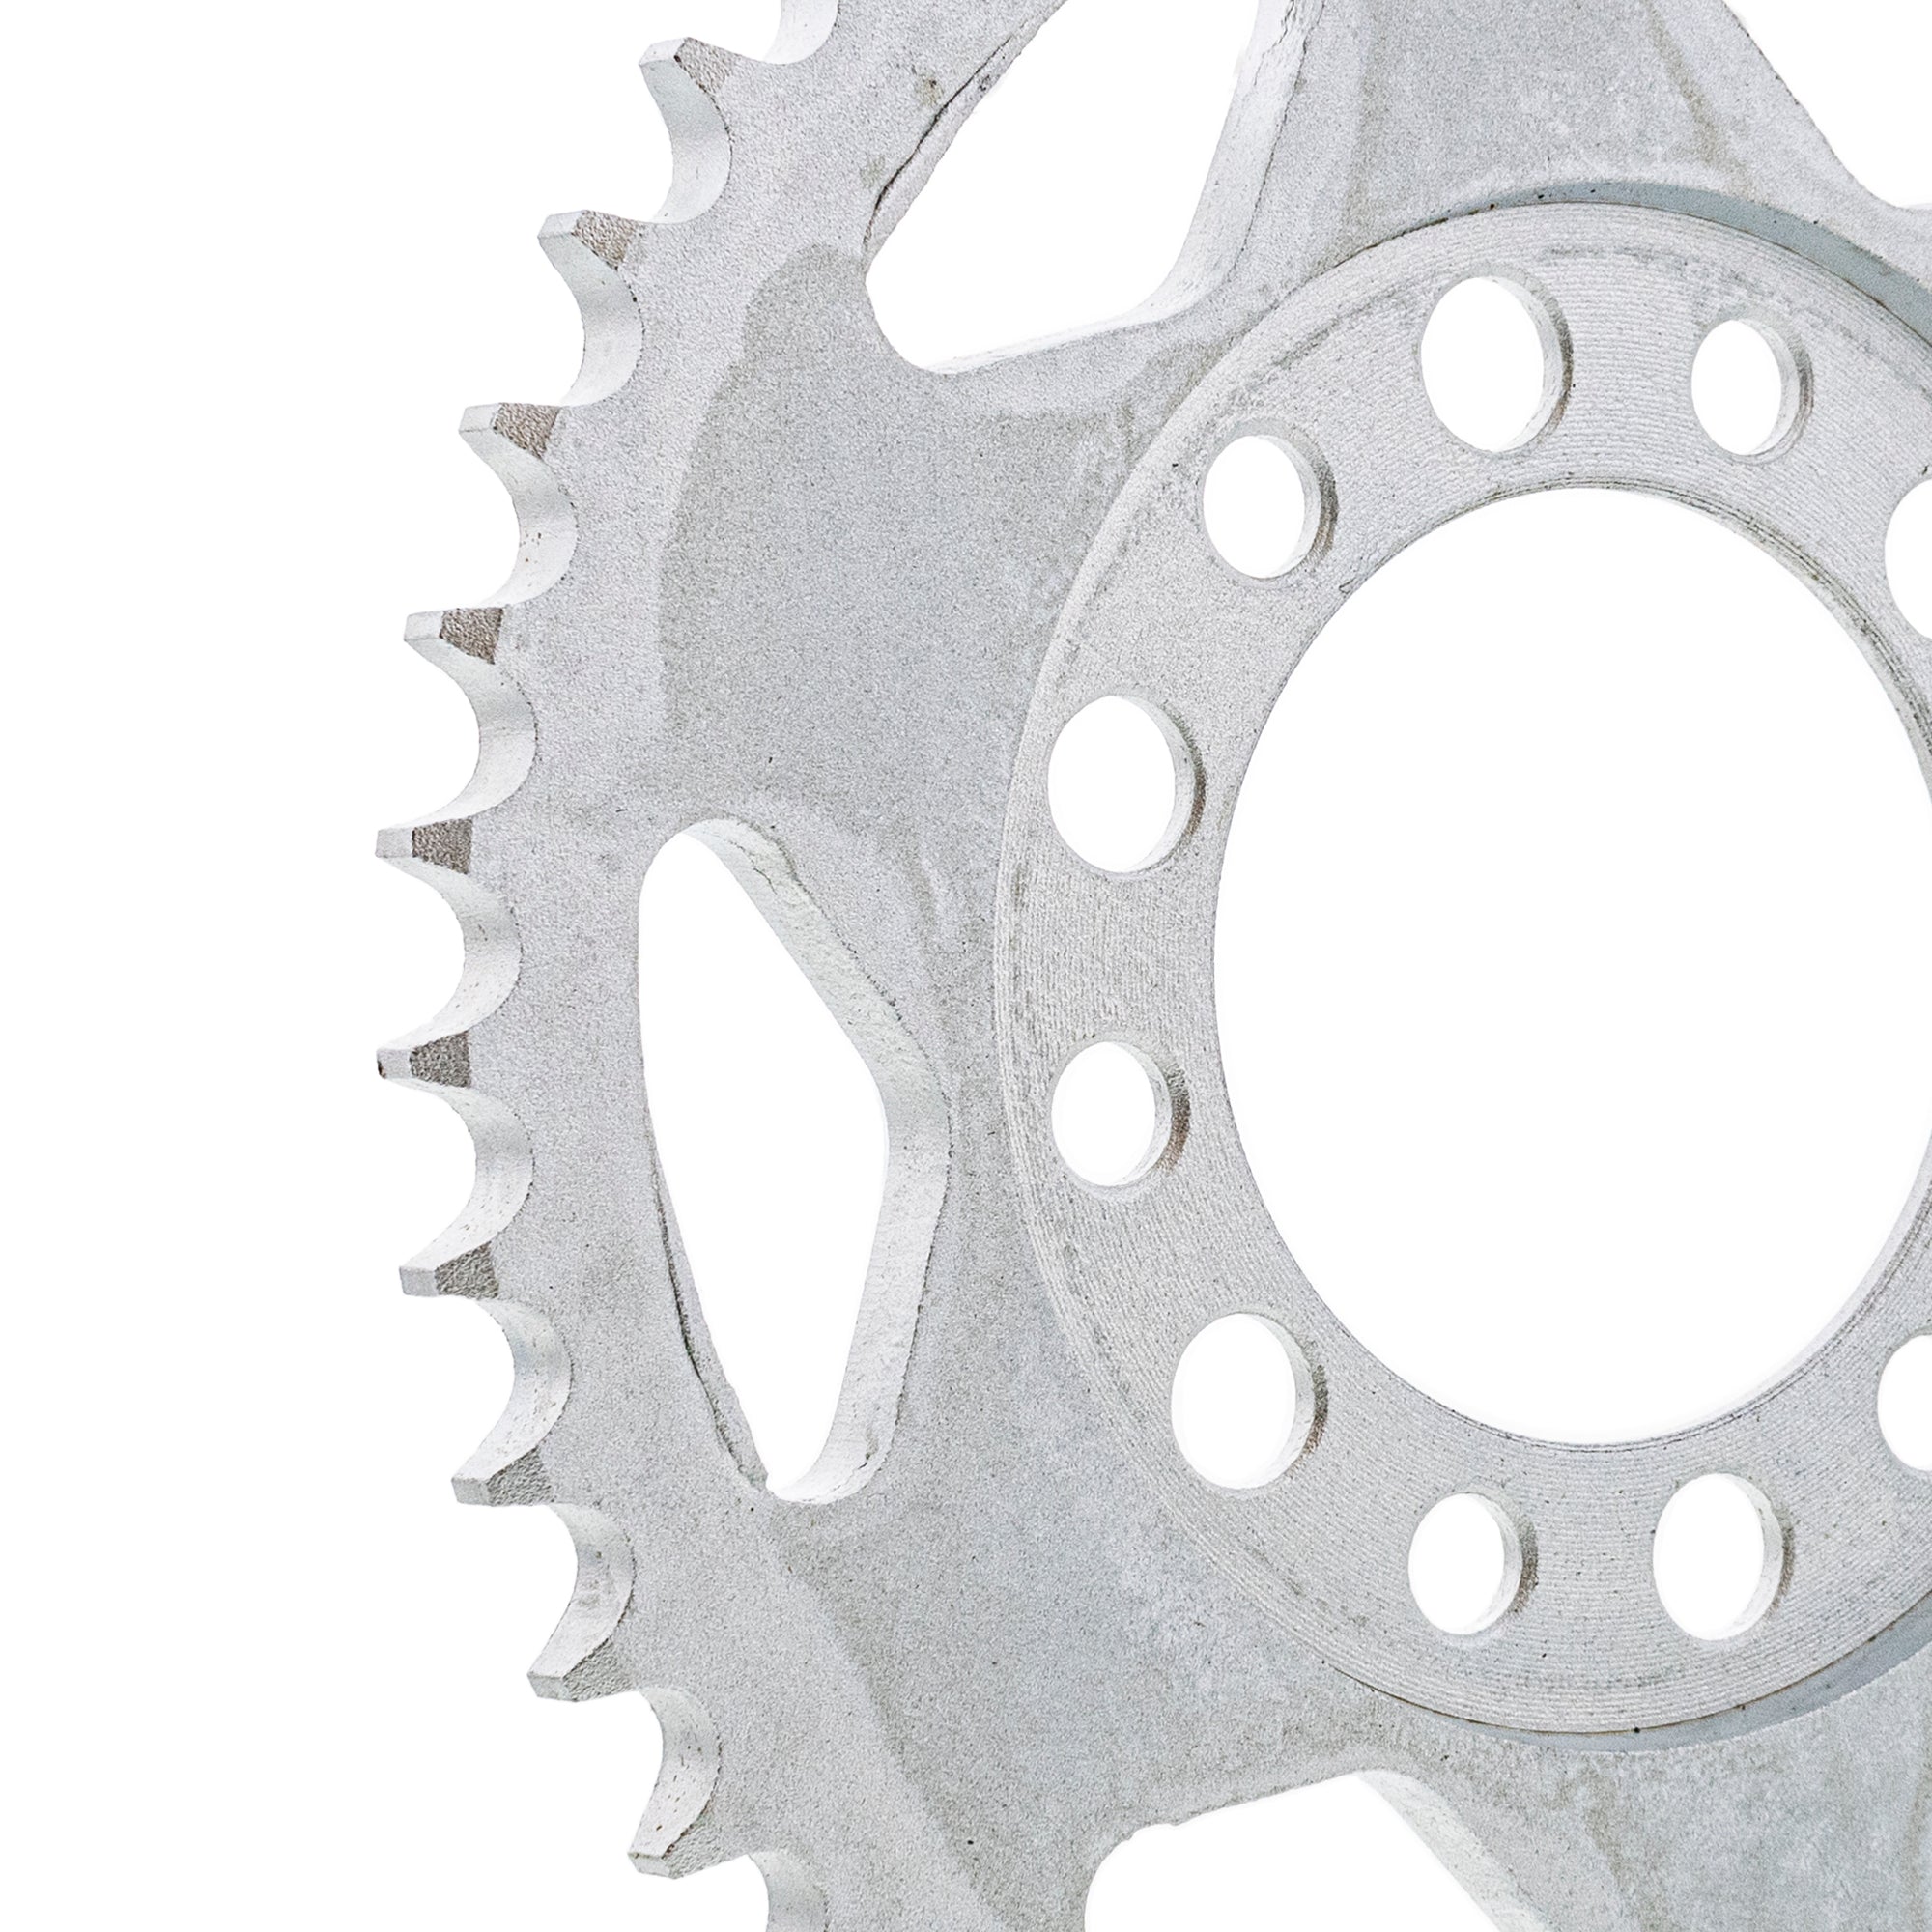 428 Pitch 44 Tooth Rear Drive Sprocket for Yamaha YZ80 DT175 DT125 AT1